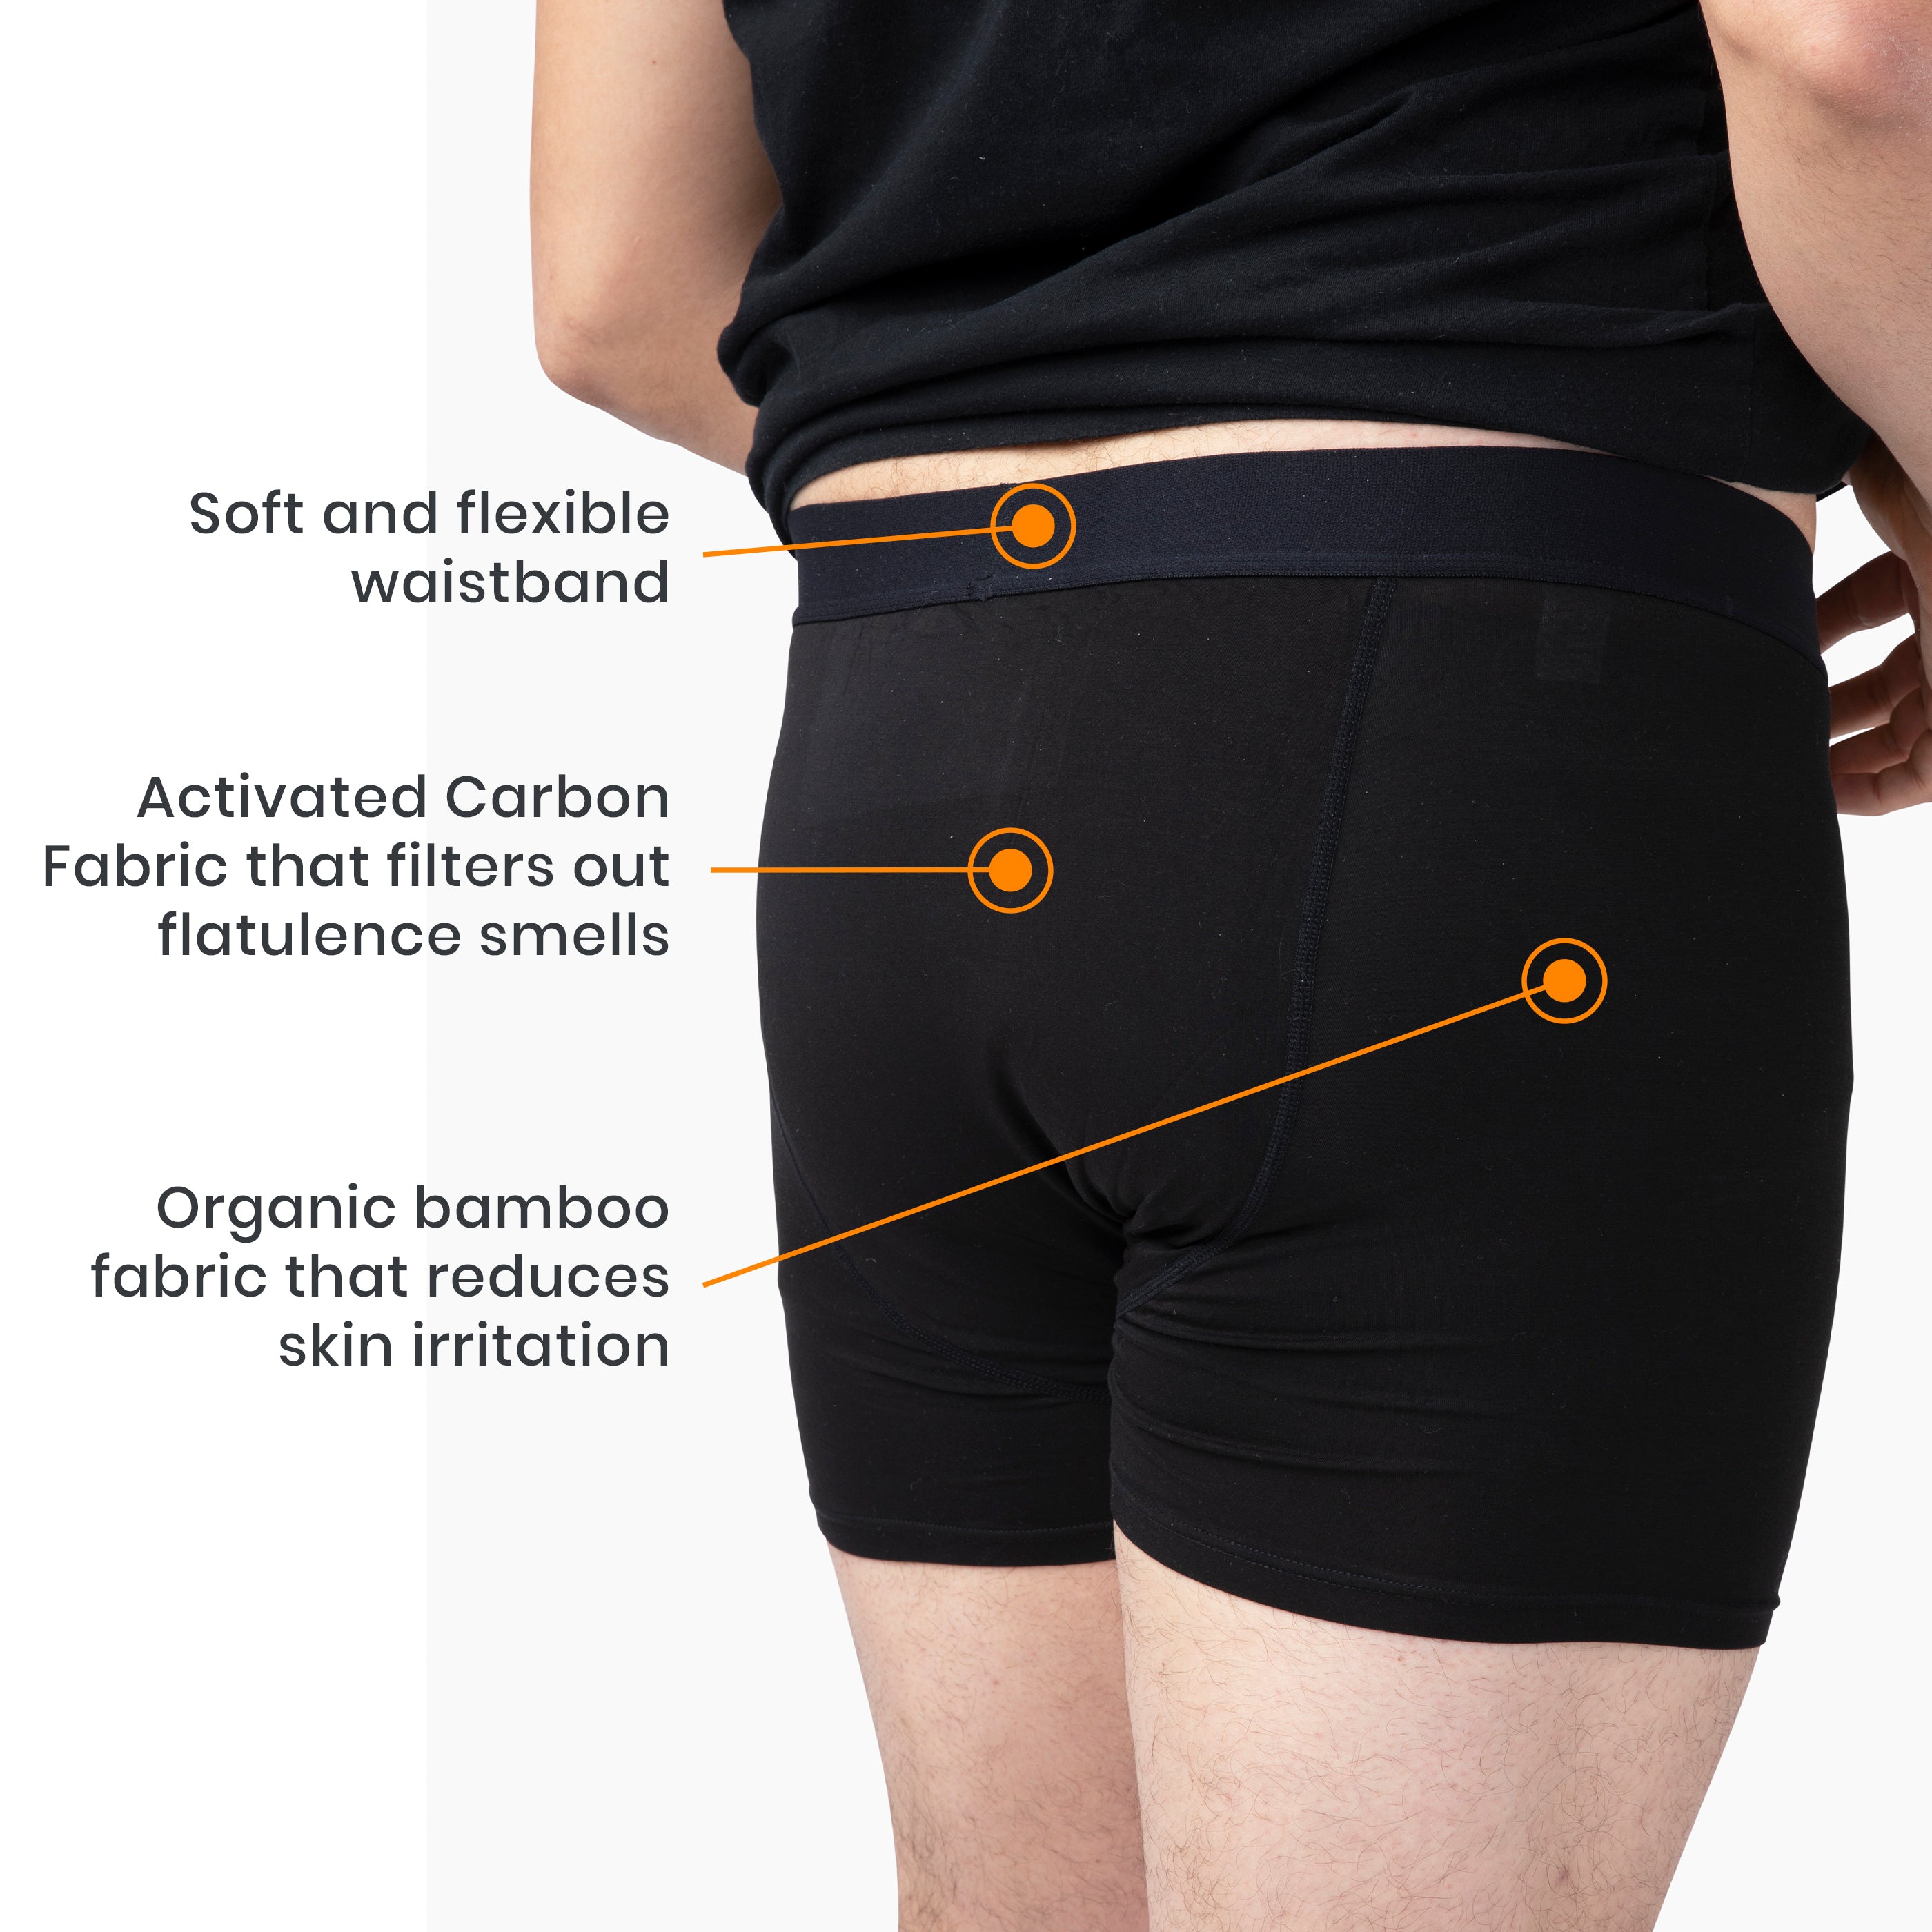 Tootles - Wait fart filtering underwear? Is that such a thing? Absolutely -  give it a try!